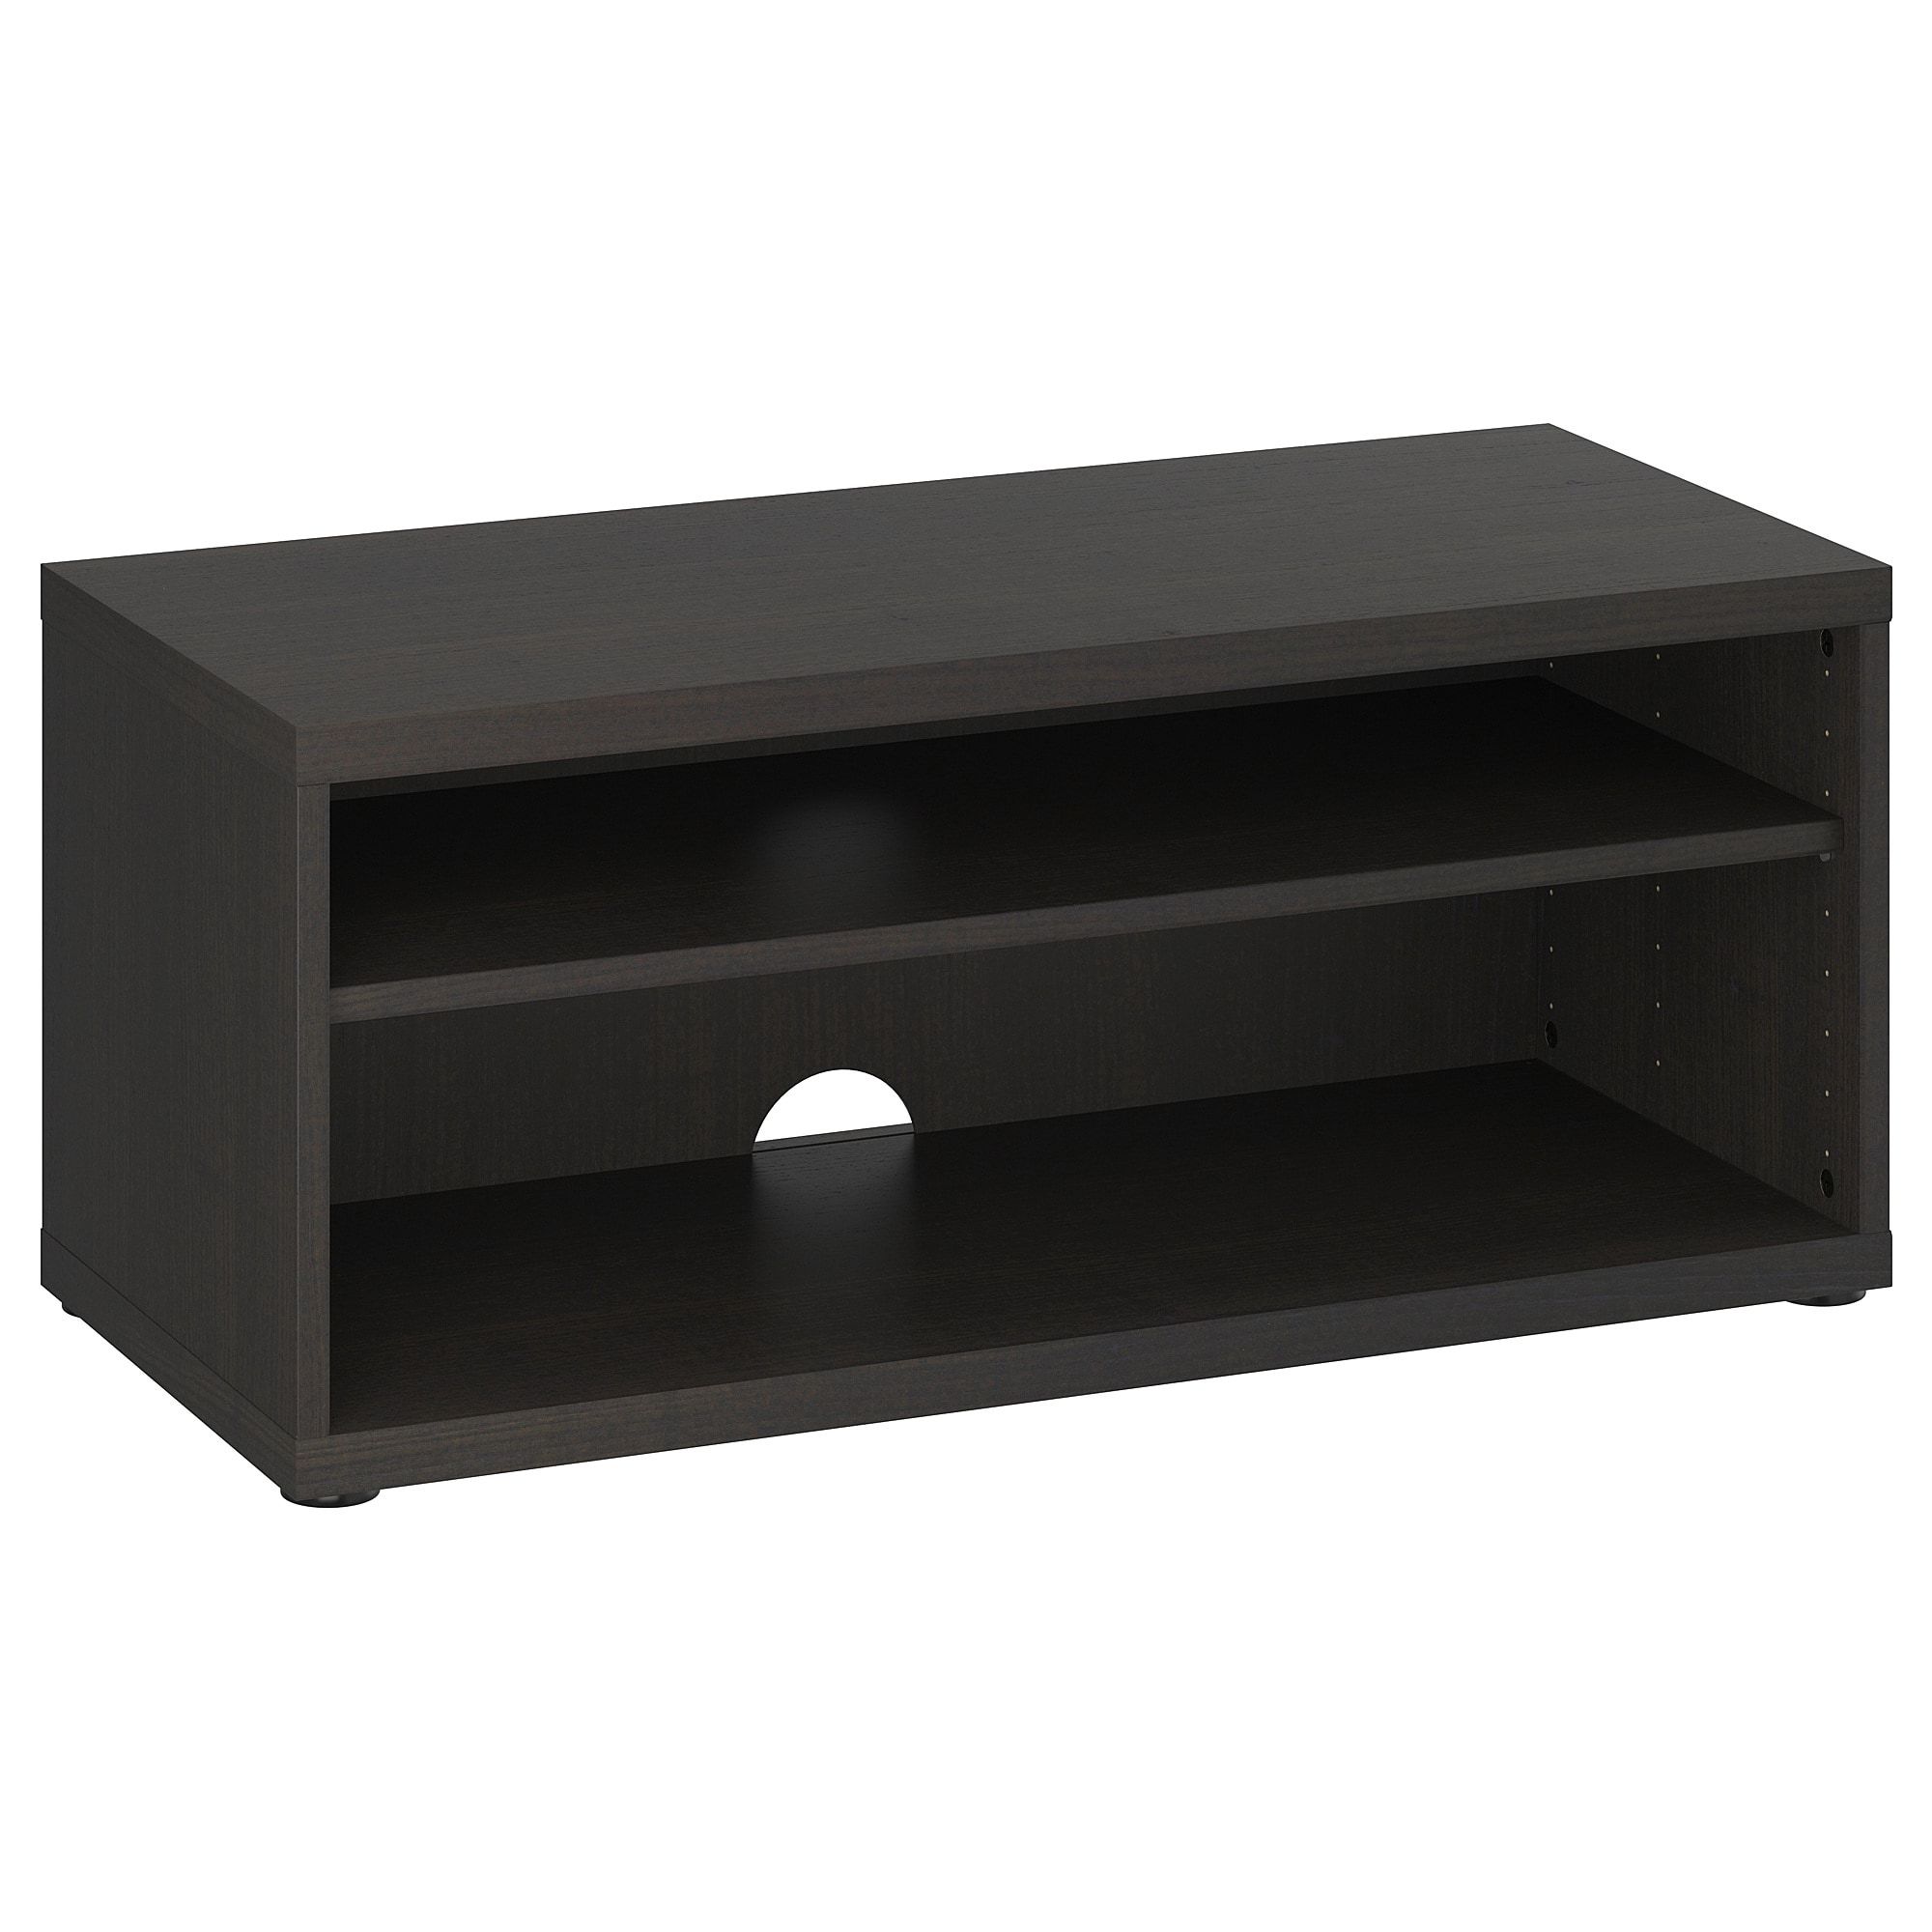 Ikea Ireland – Dublin Inside Widely Used Swivel Black Glass Tv Stands (View 18 of 20)